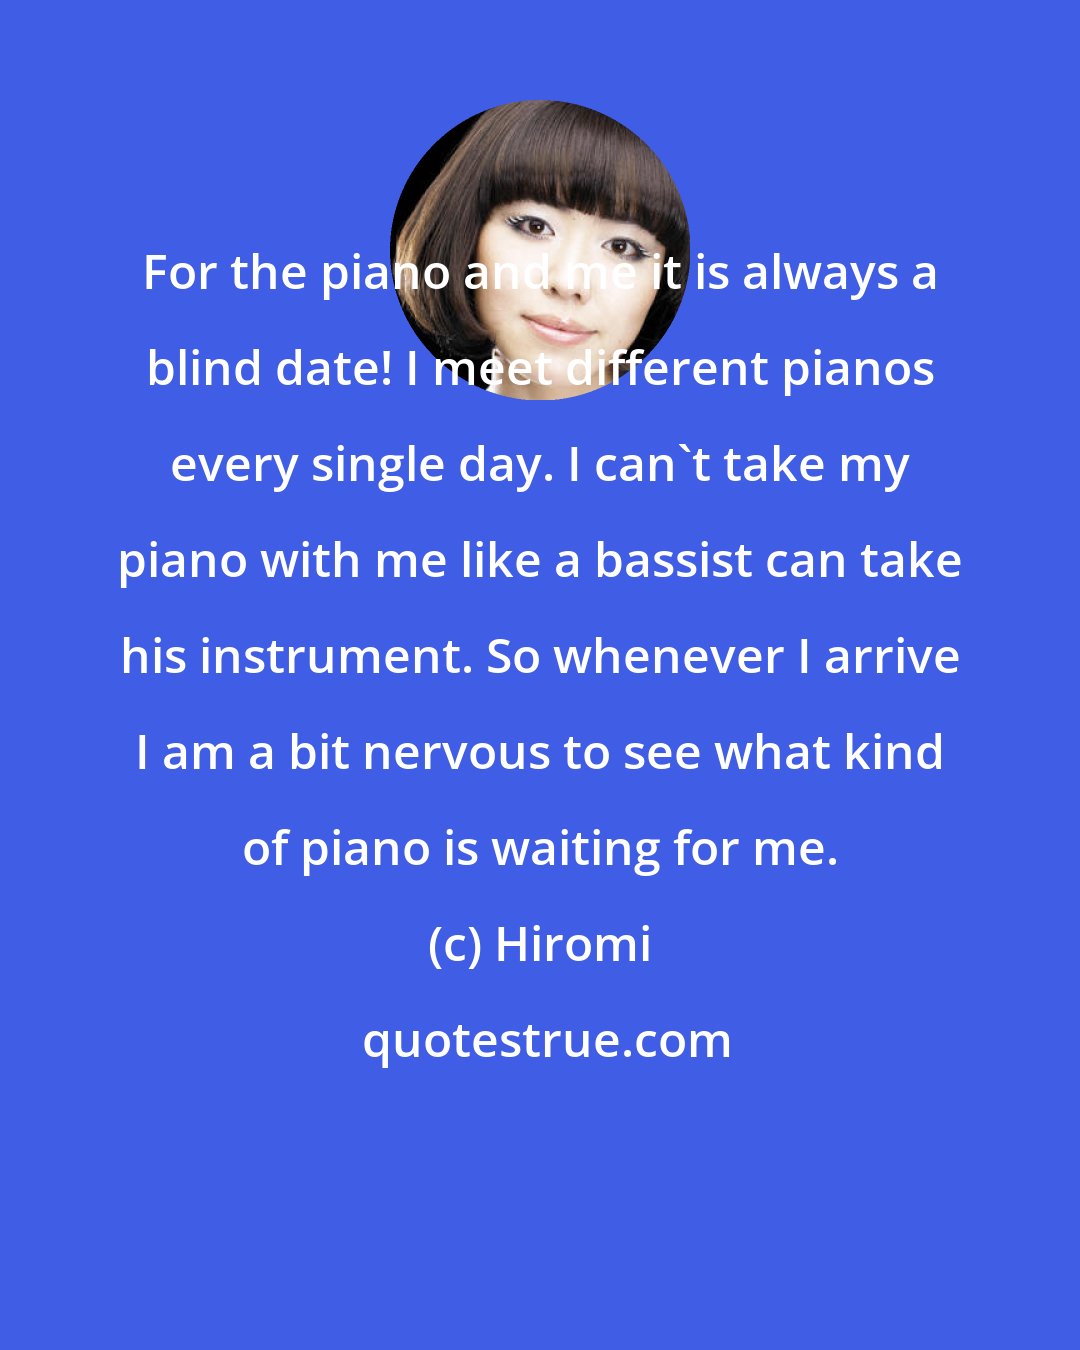 Hiromi: For the piano and me it is always a blind date! I meet different pianos every single day. I can't take my piano with me like a bassist can take his instrument. So whenever I arrive I am a bit nervous to see what kind of piano is waiting for me.